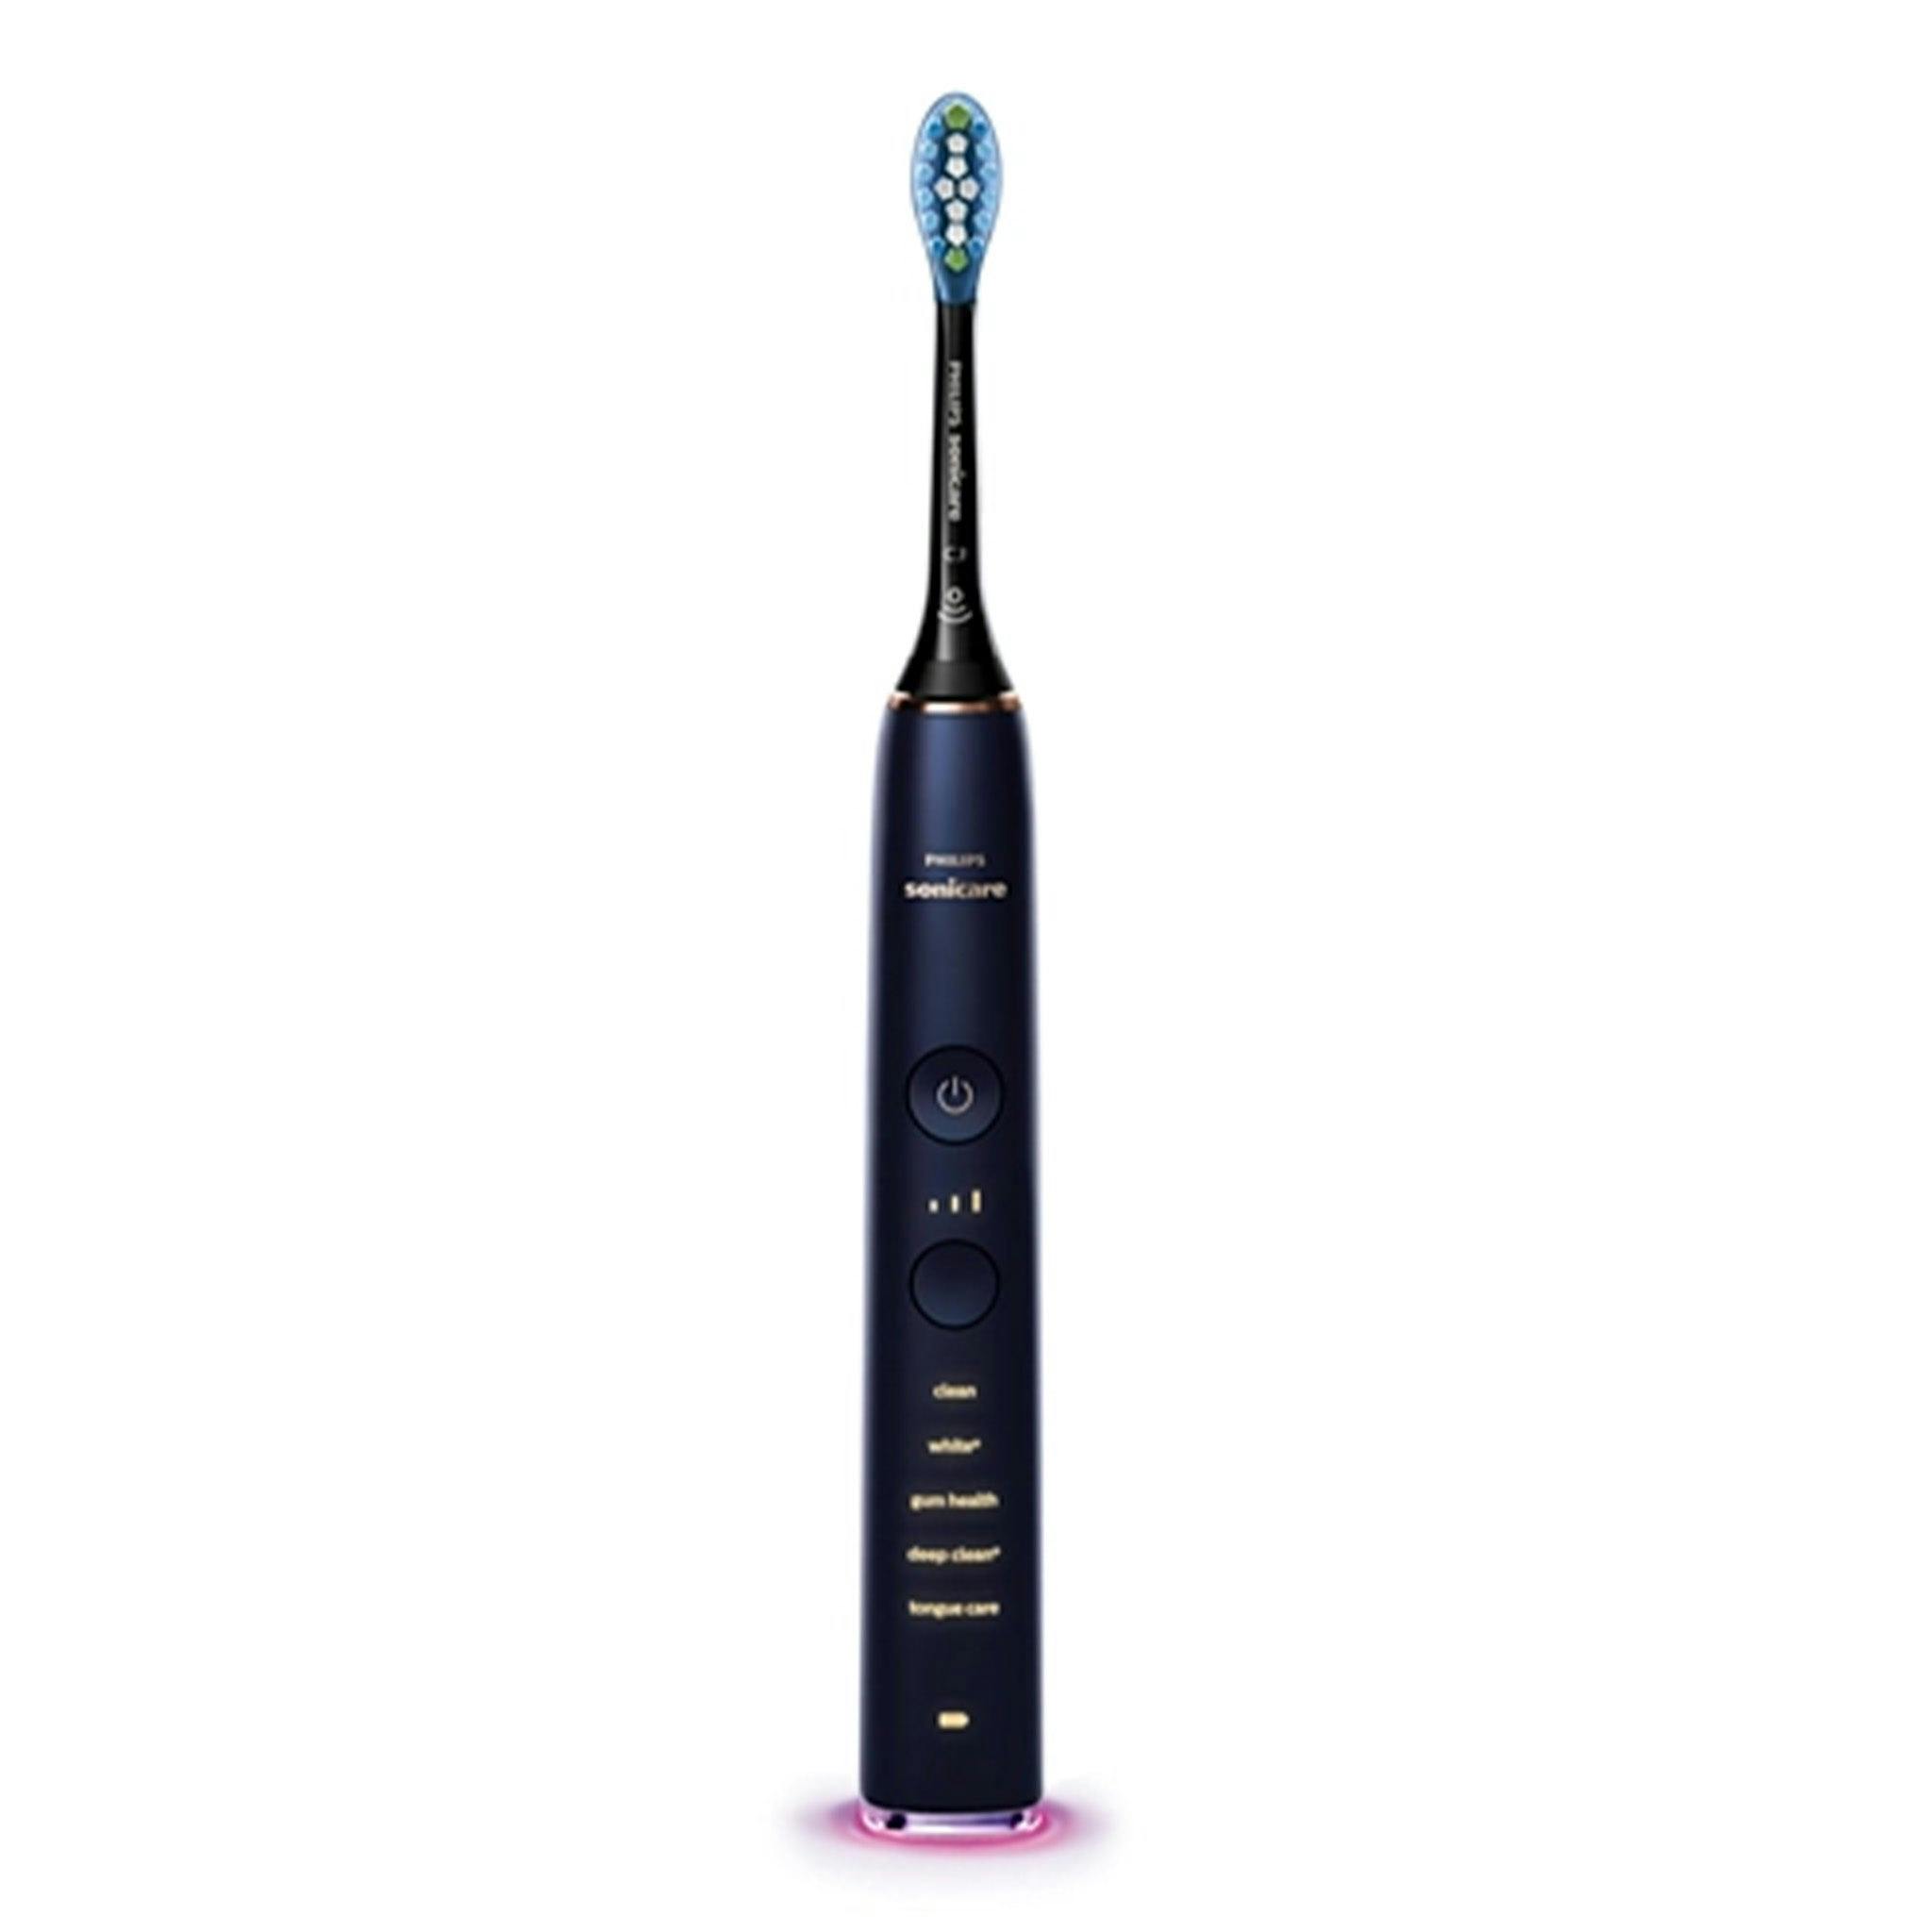 Philips Sonicare DiamondClean Smart Electric Toothbrush - Lunar Blue